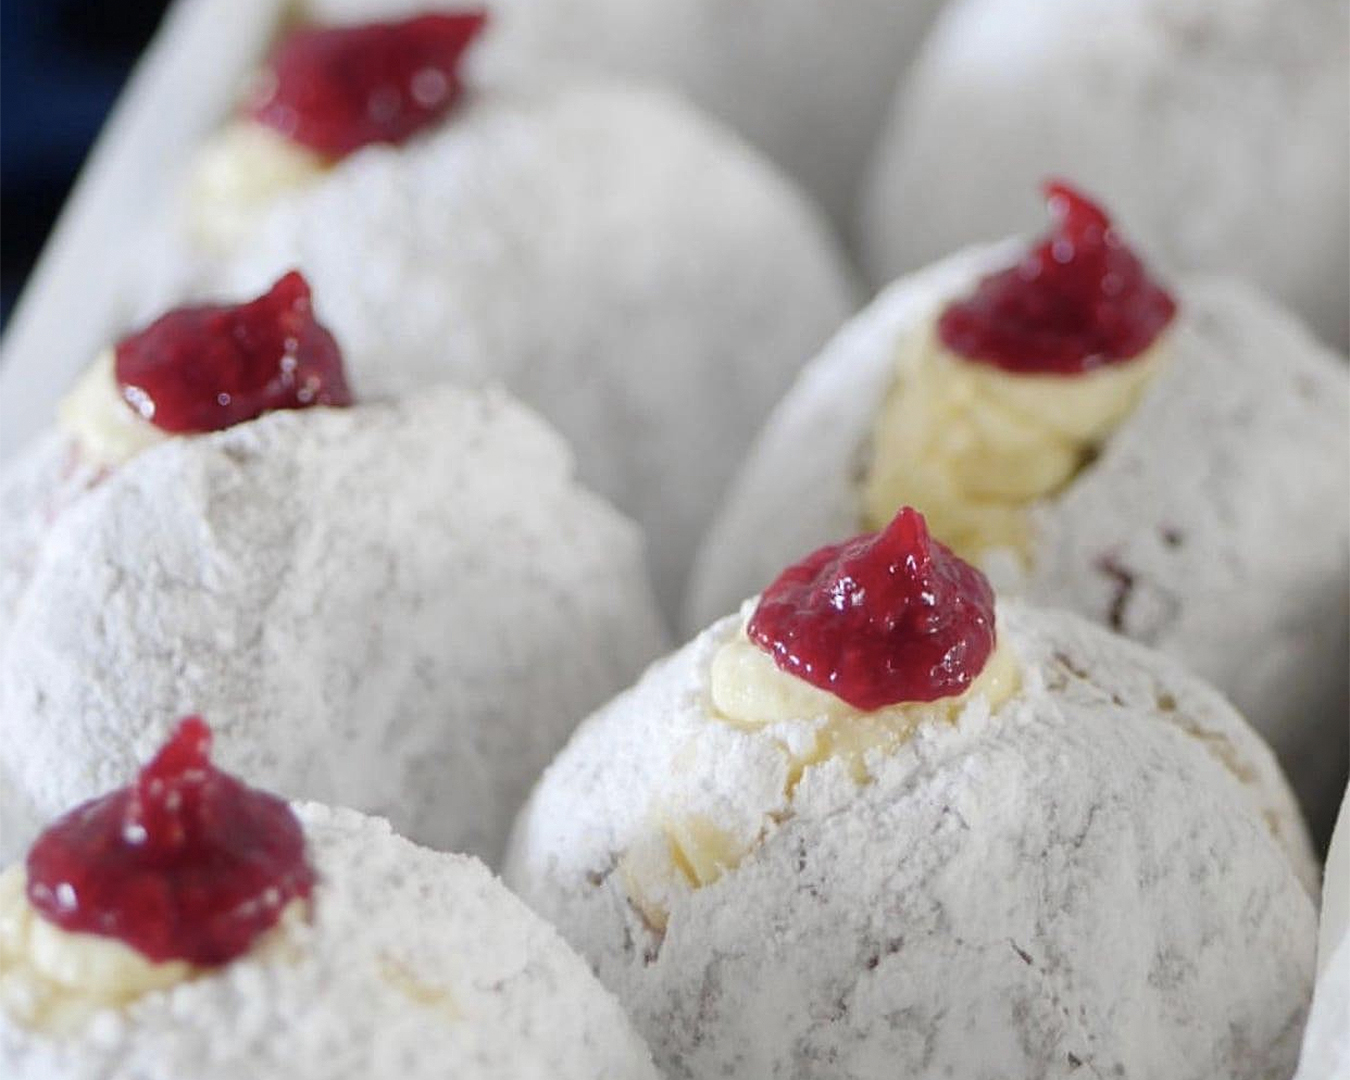 Diplomat donuts bursting with cream and raspberry coulis